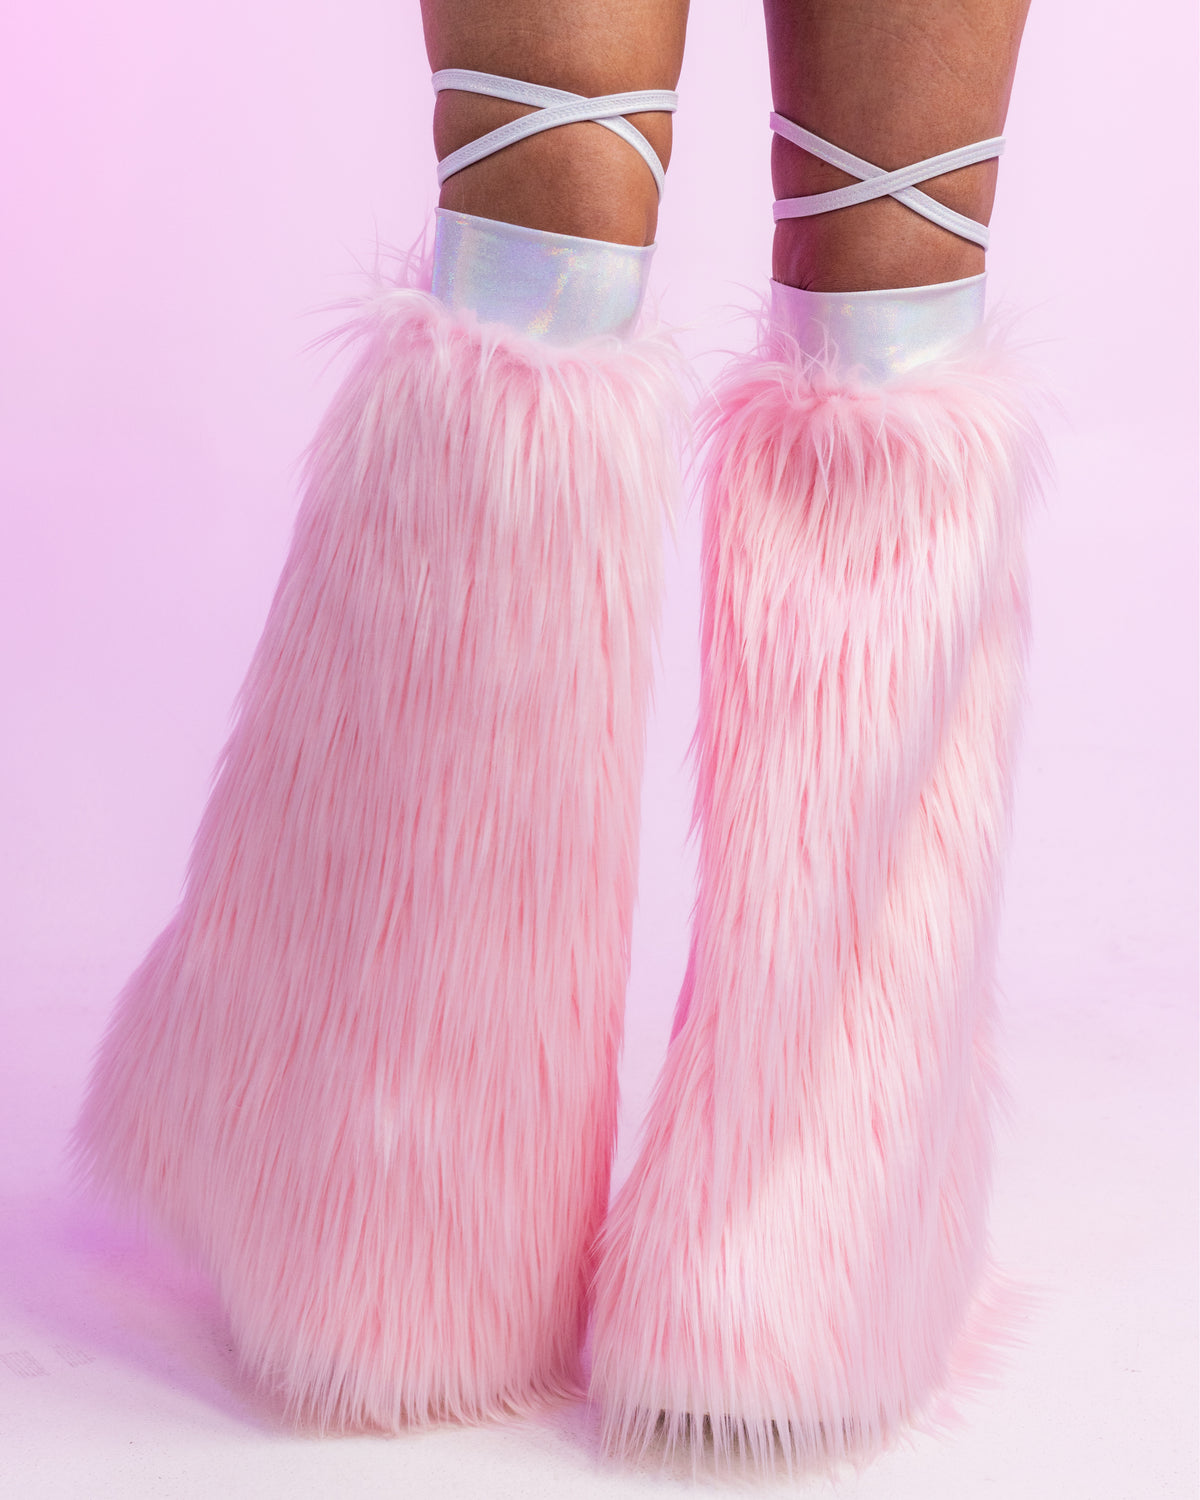 Rolita Couture x RW Baby Pink Fluffies